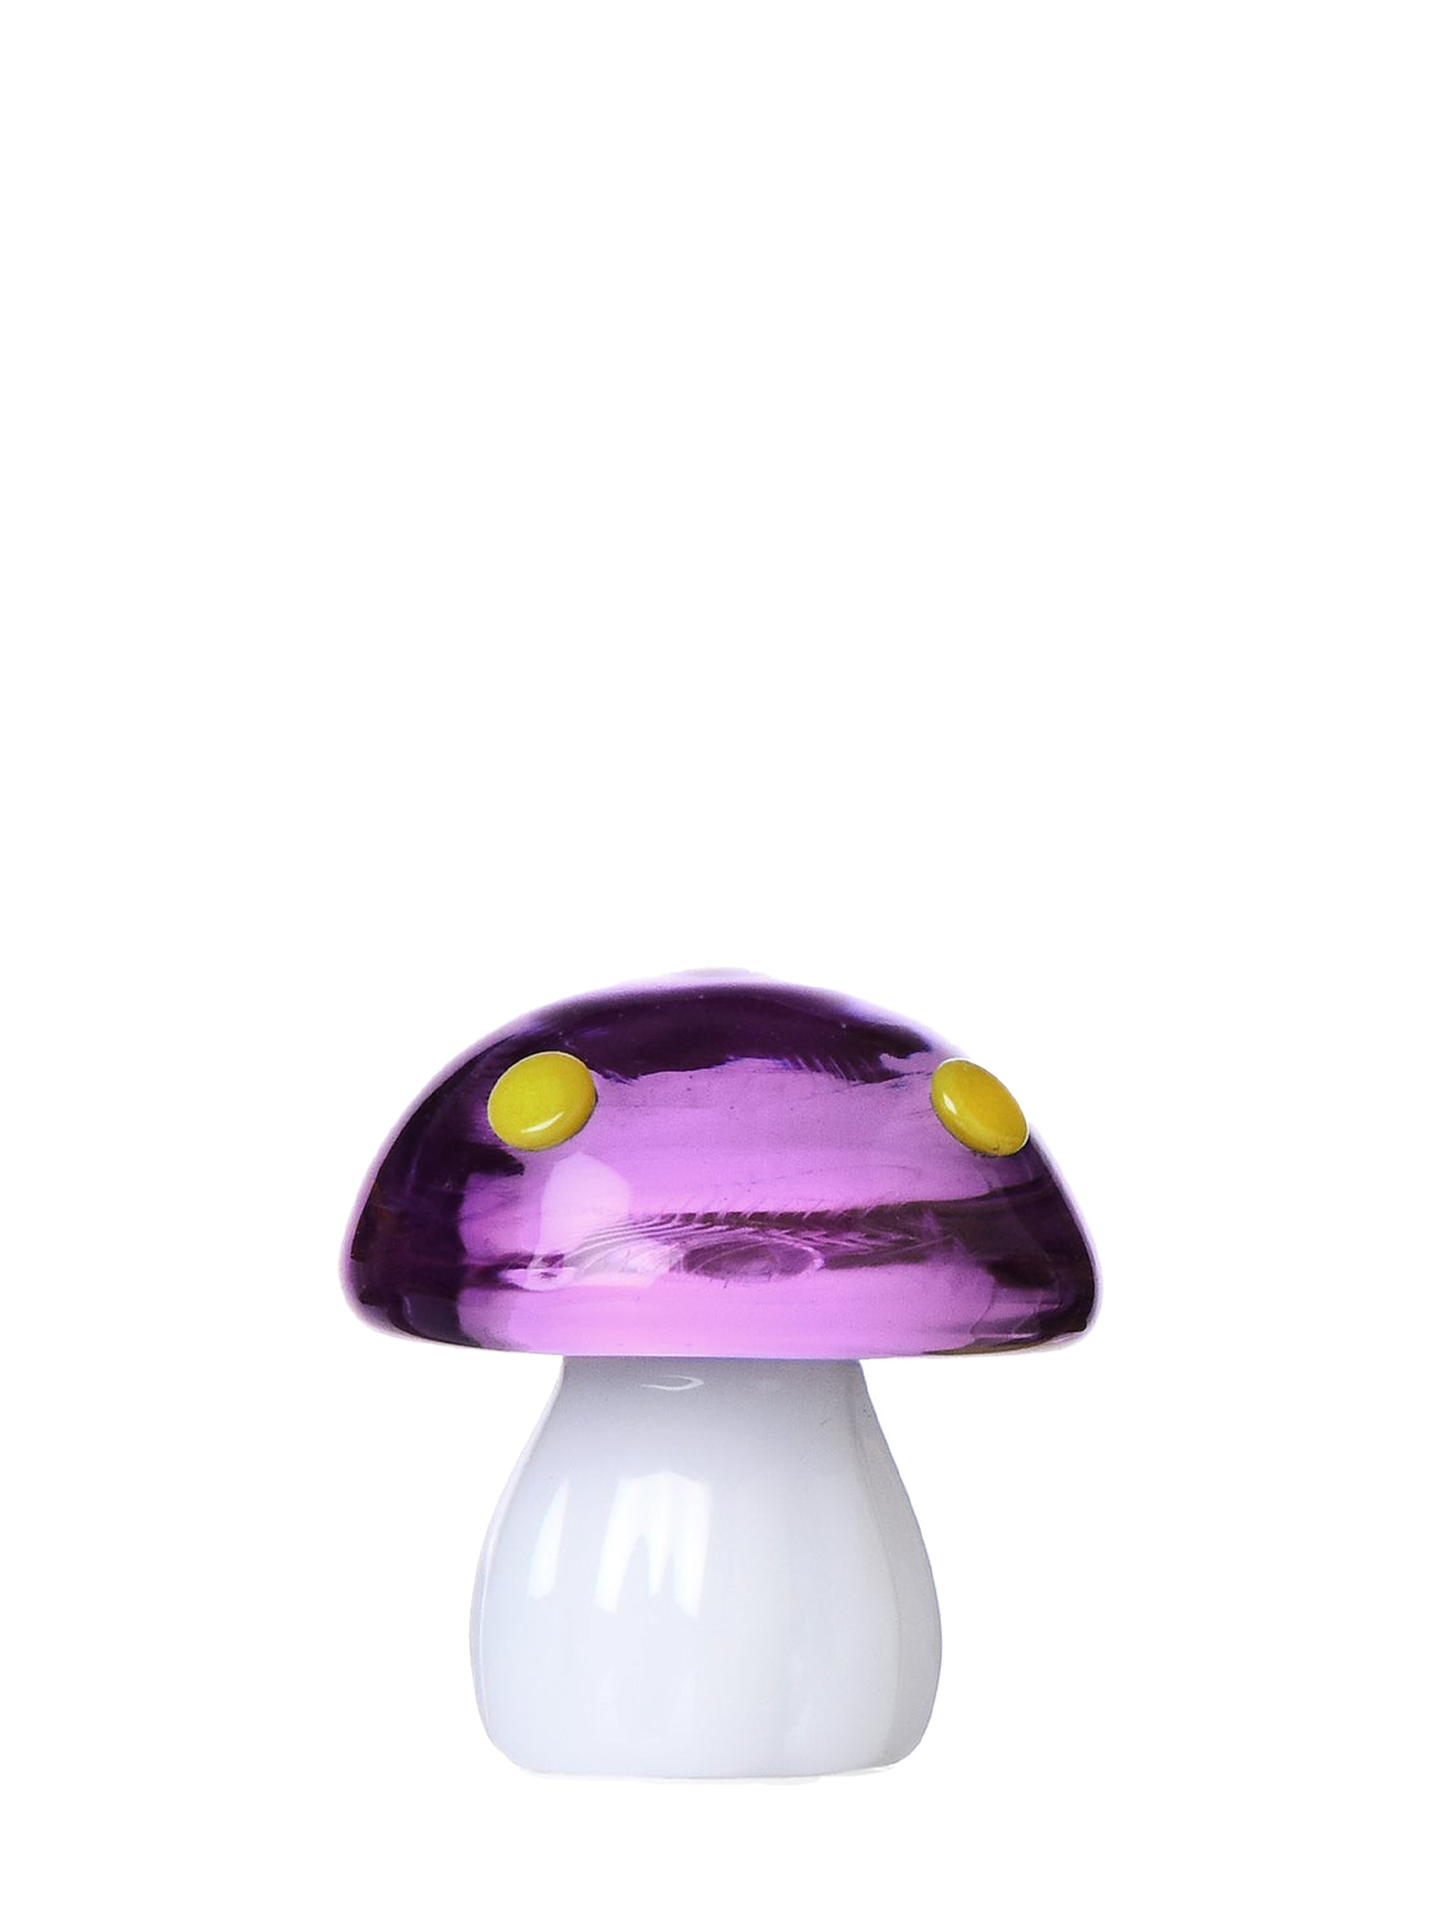 Purple Mushroom Paperweight, Alice Collection